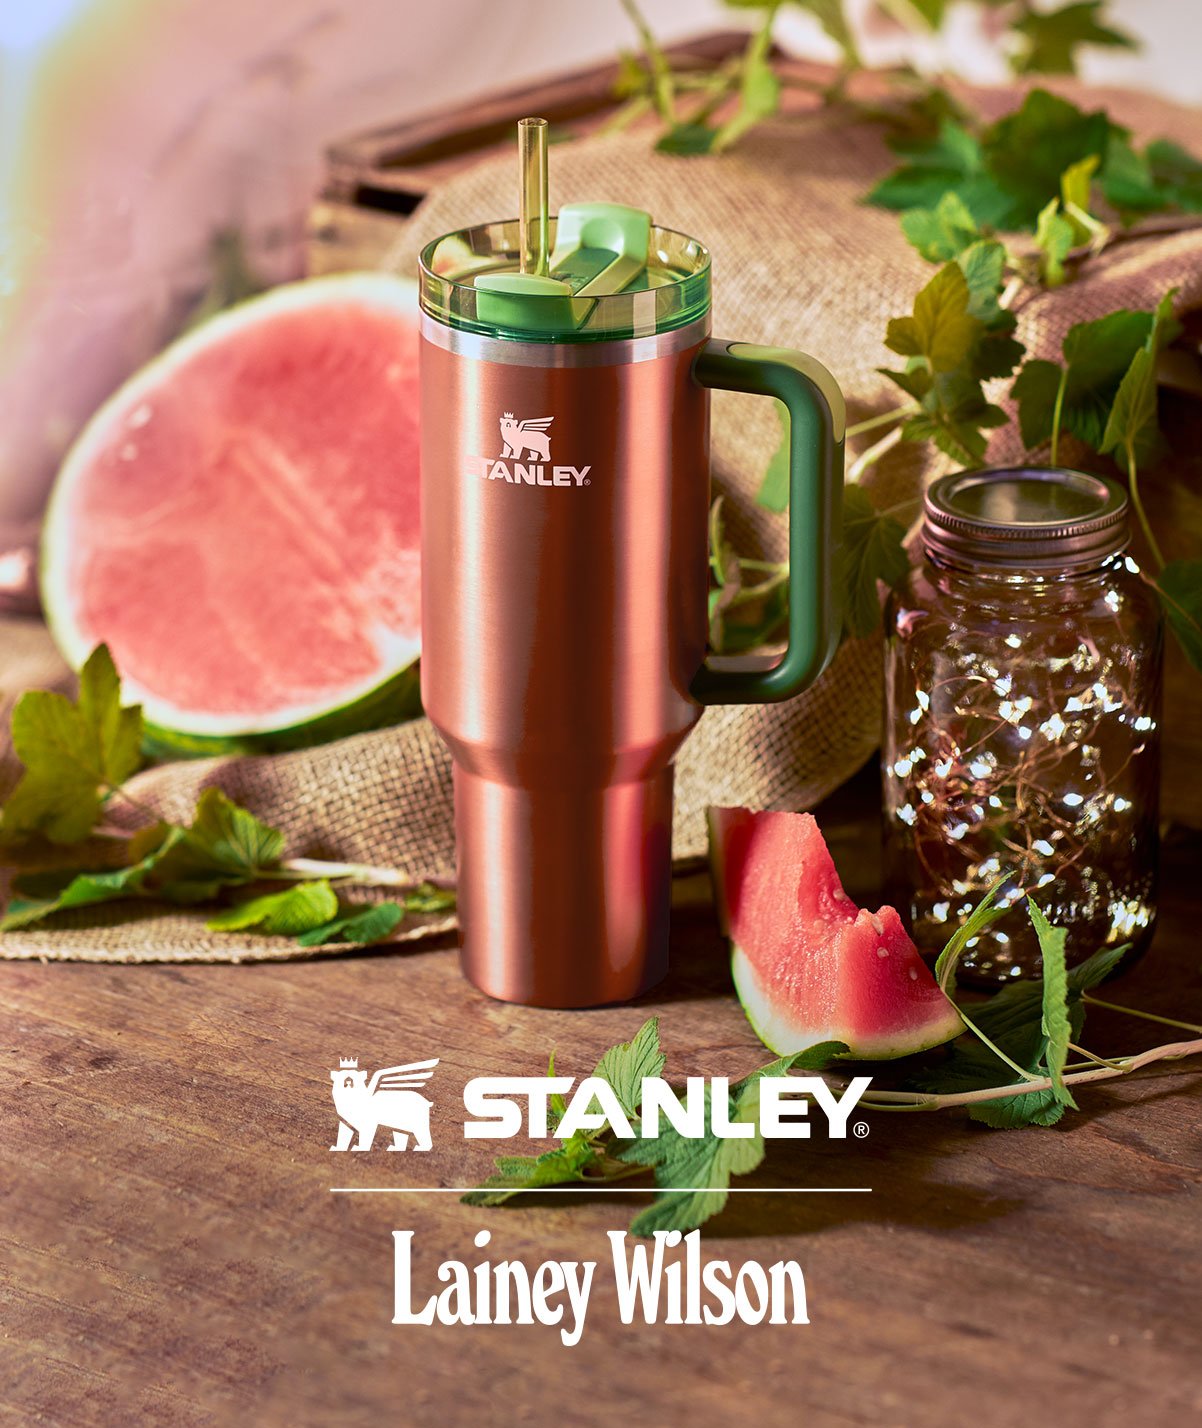 Limited Edition Stanley x Lainey Wilson Quencher H2.0 Tumbler Watermelon  Moonshine 40 Oz.